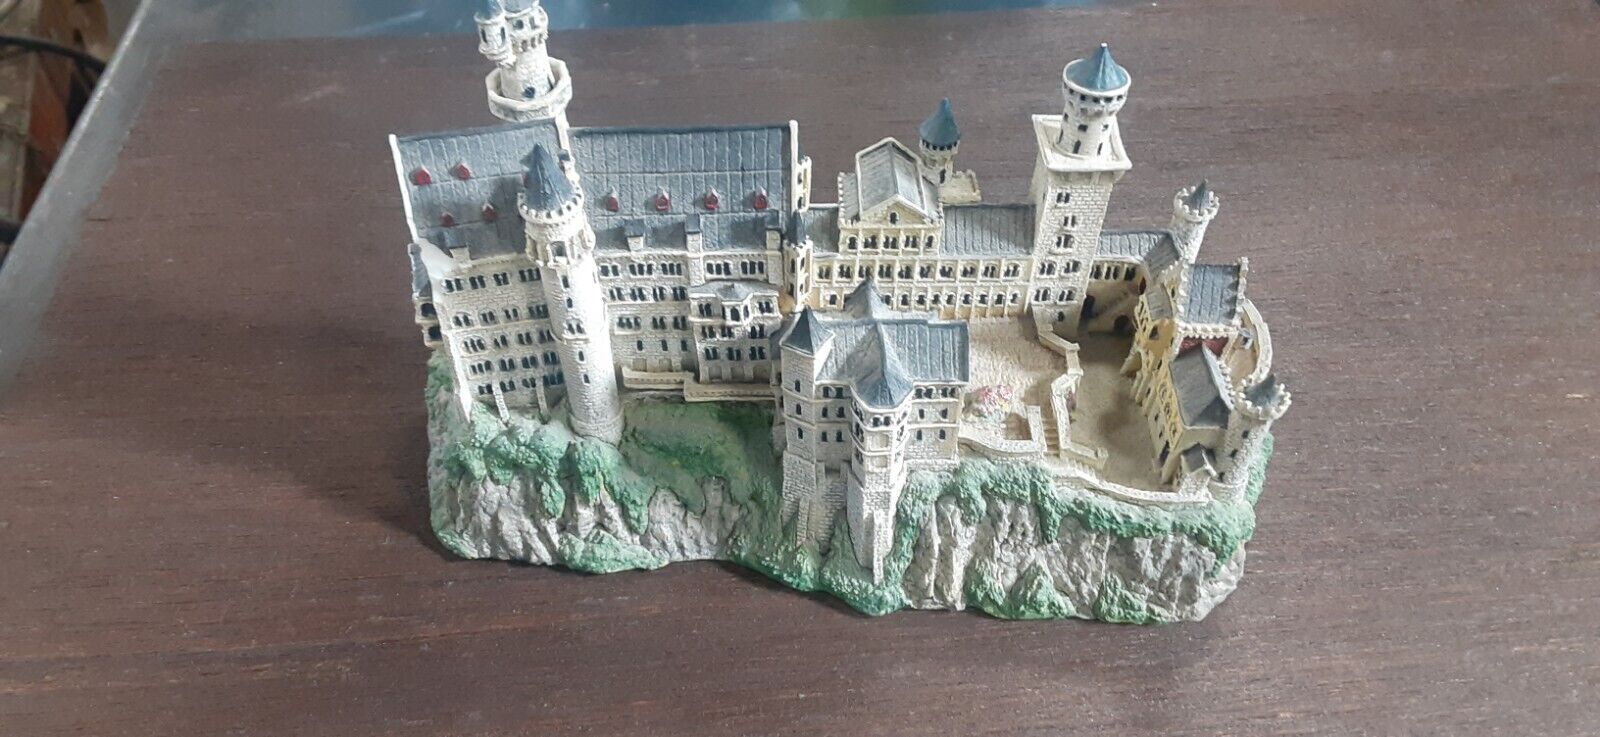 NEUSHWANSTEIN CASTLE BAVARIA GERMANY. FROM THE DANBURY COLLECTION